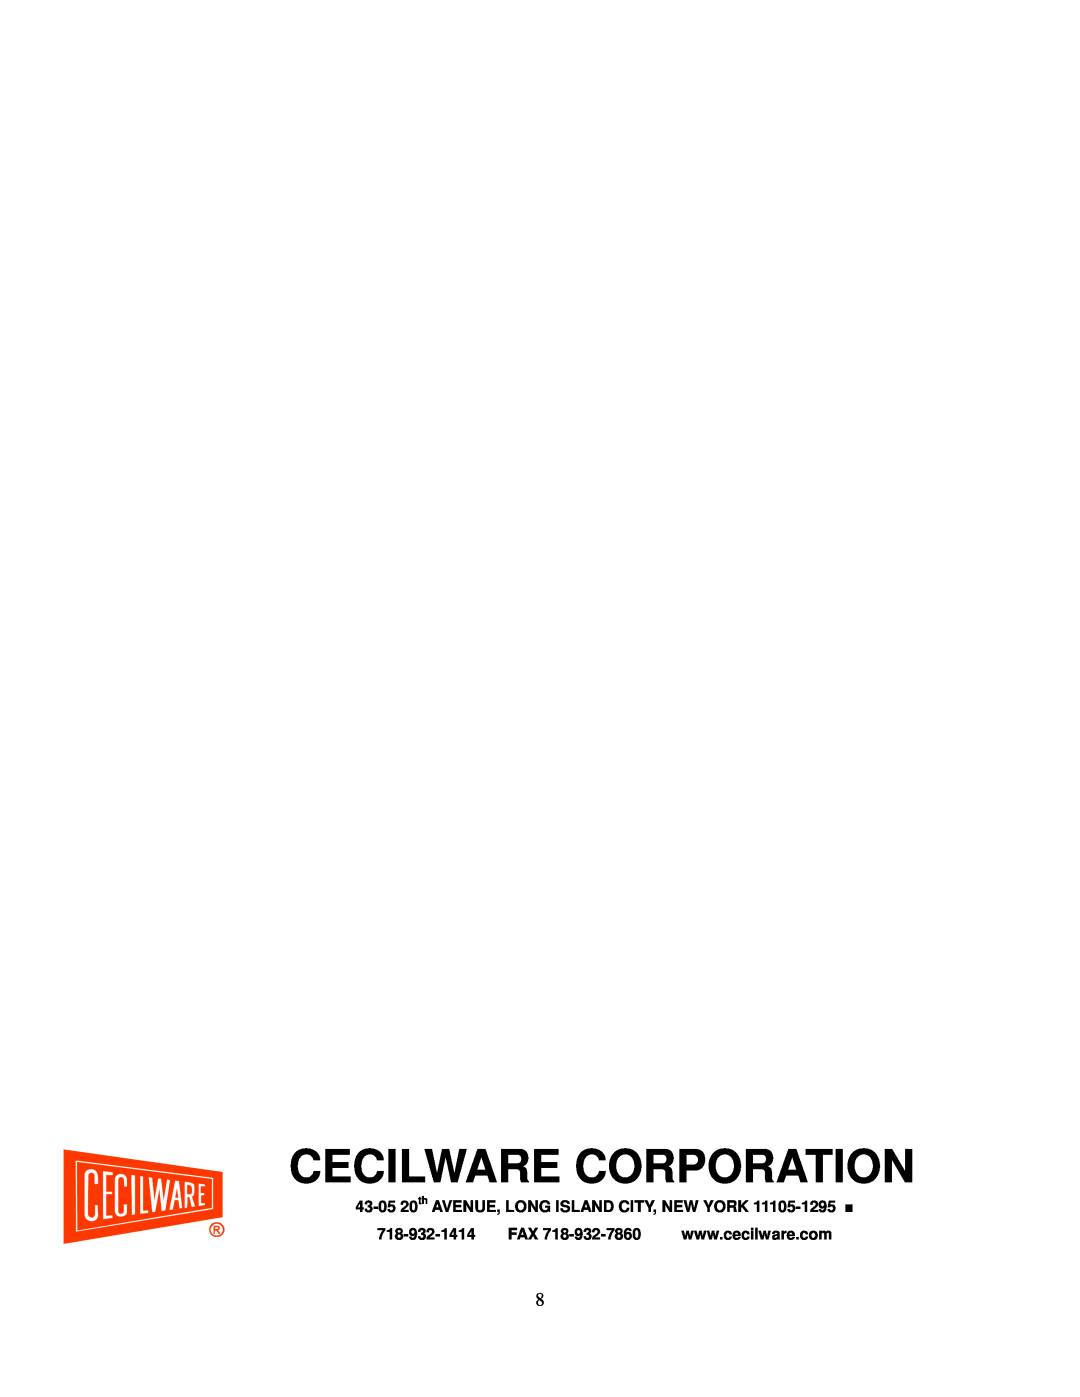 Cecilware FW-25WT operation manual Cecilware Corporation, 43-0520th AVENUE, LONG ISLAND CITY, NEW YORK 